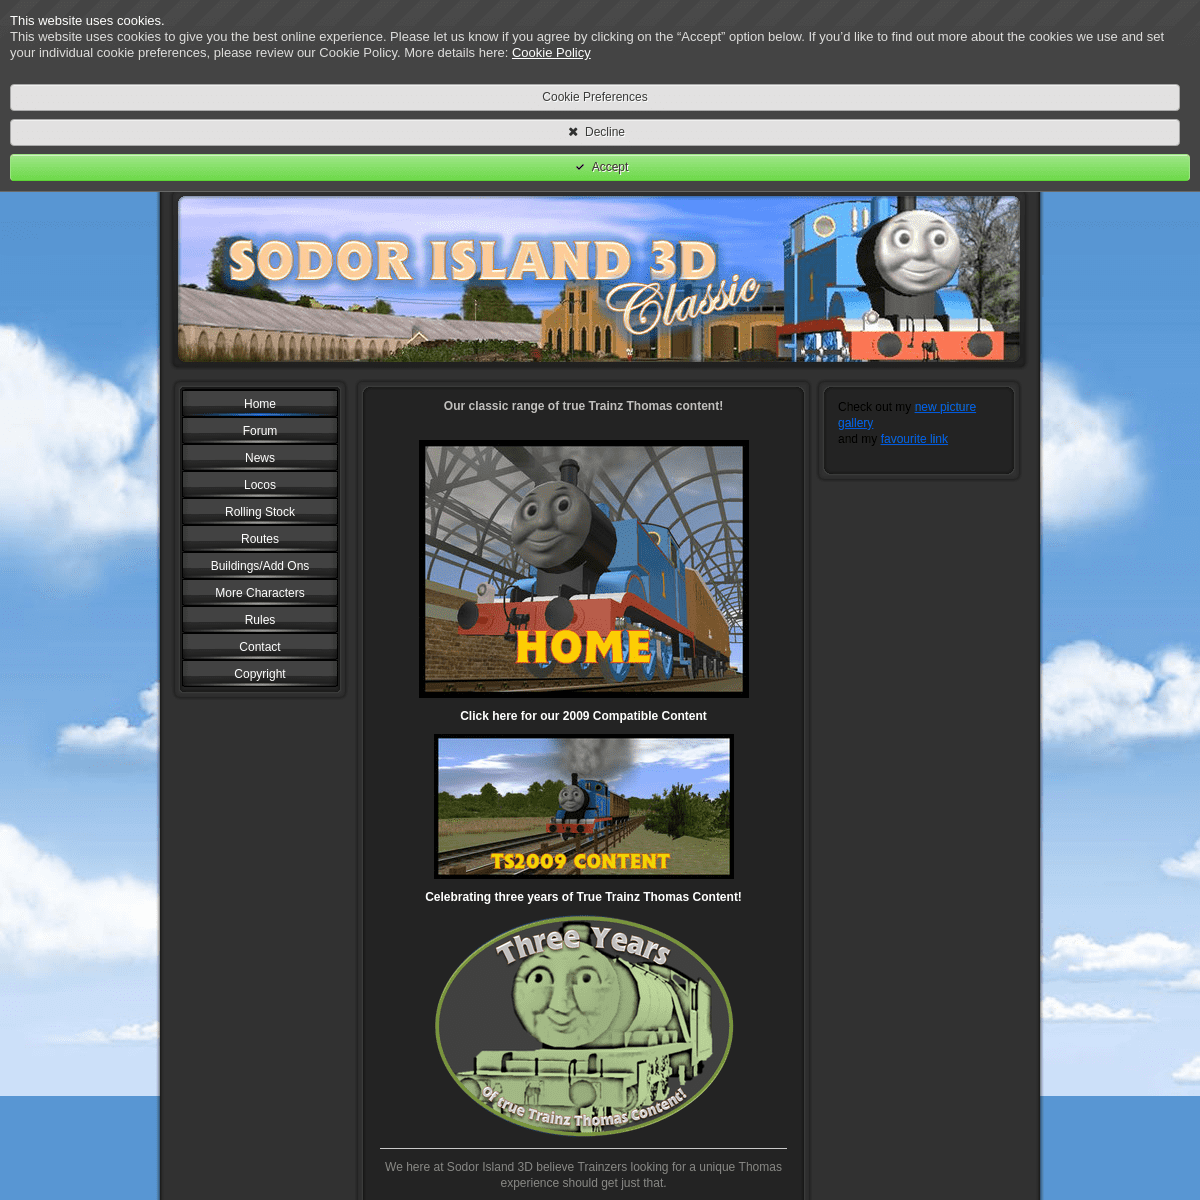 how to download sodor island 3d